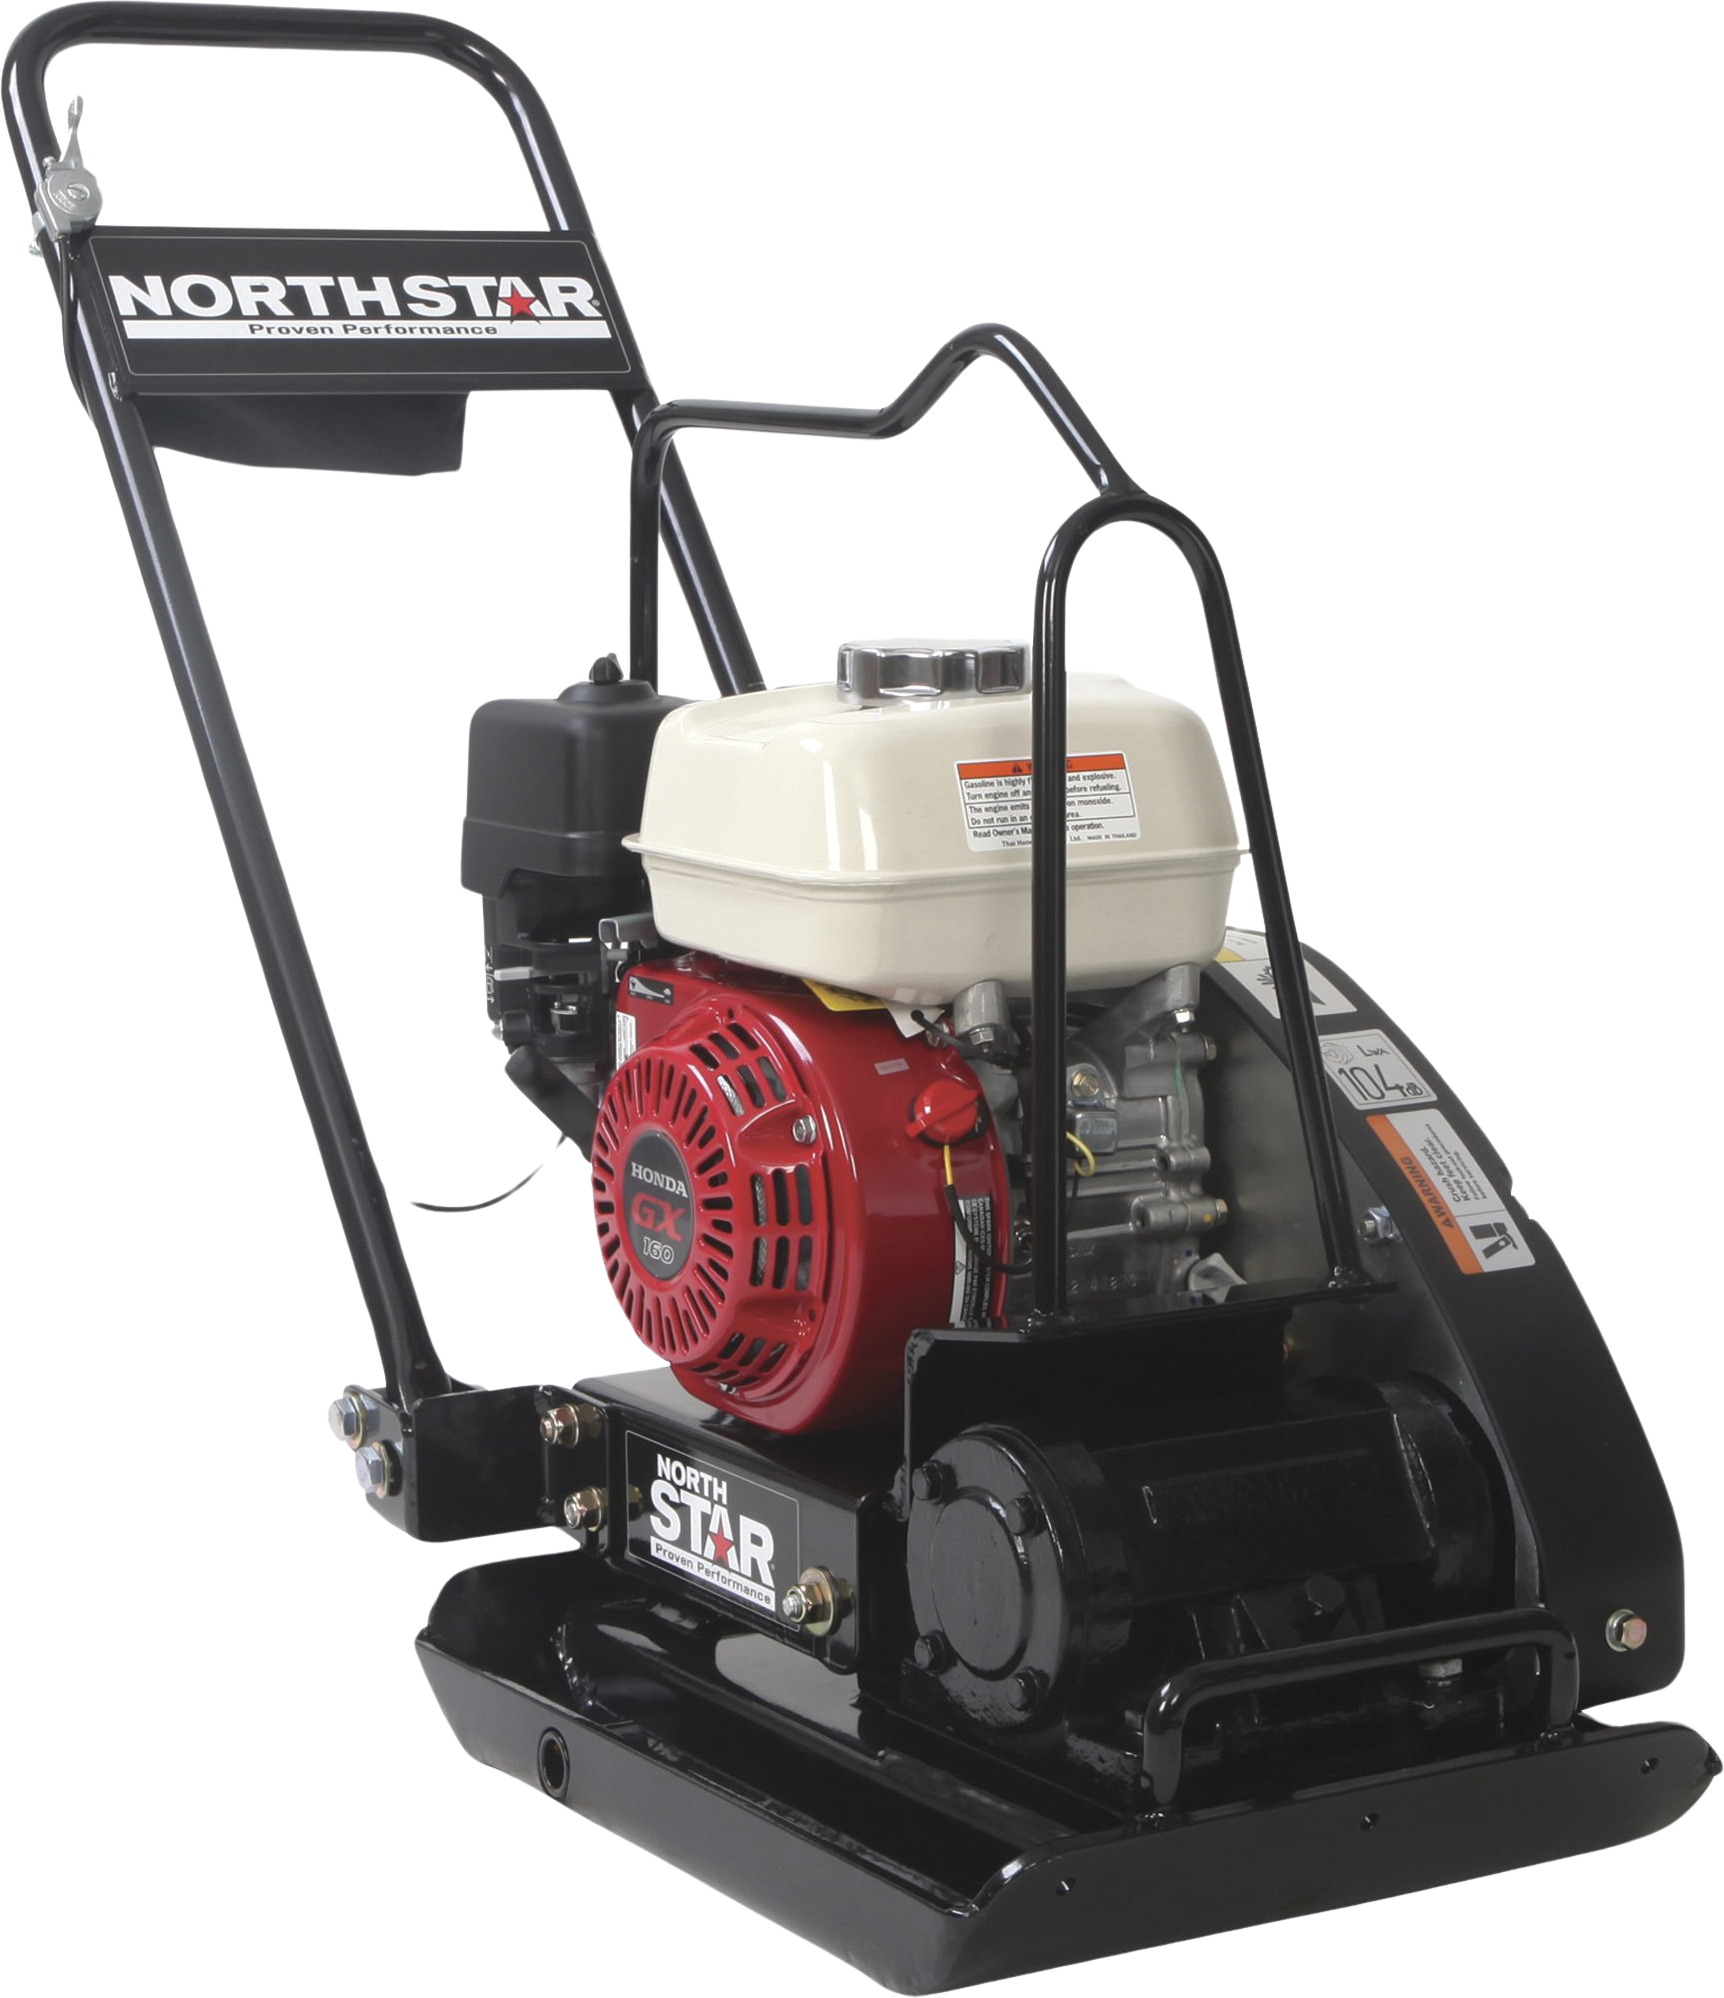 NorthStar, NorthStar 49159 Close Quarters Plate Compactor Honda GX160 5.5HP Compaction Force of 2270 lbs New